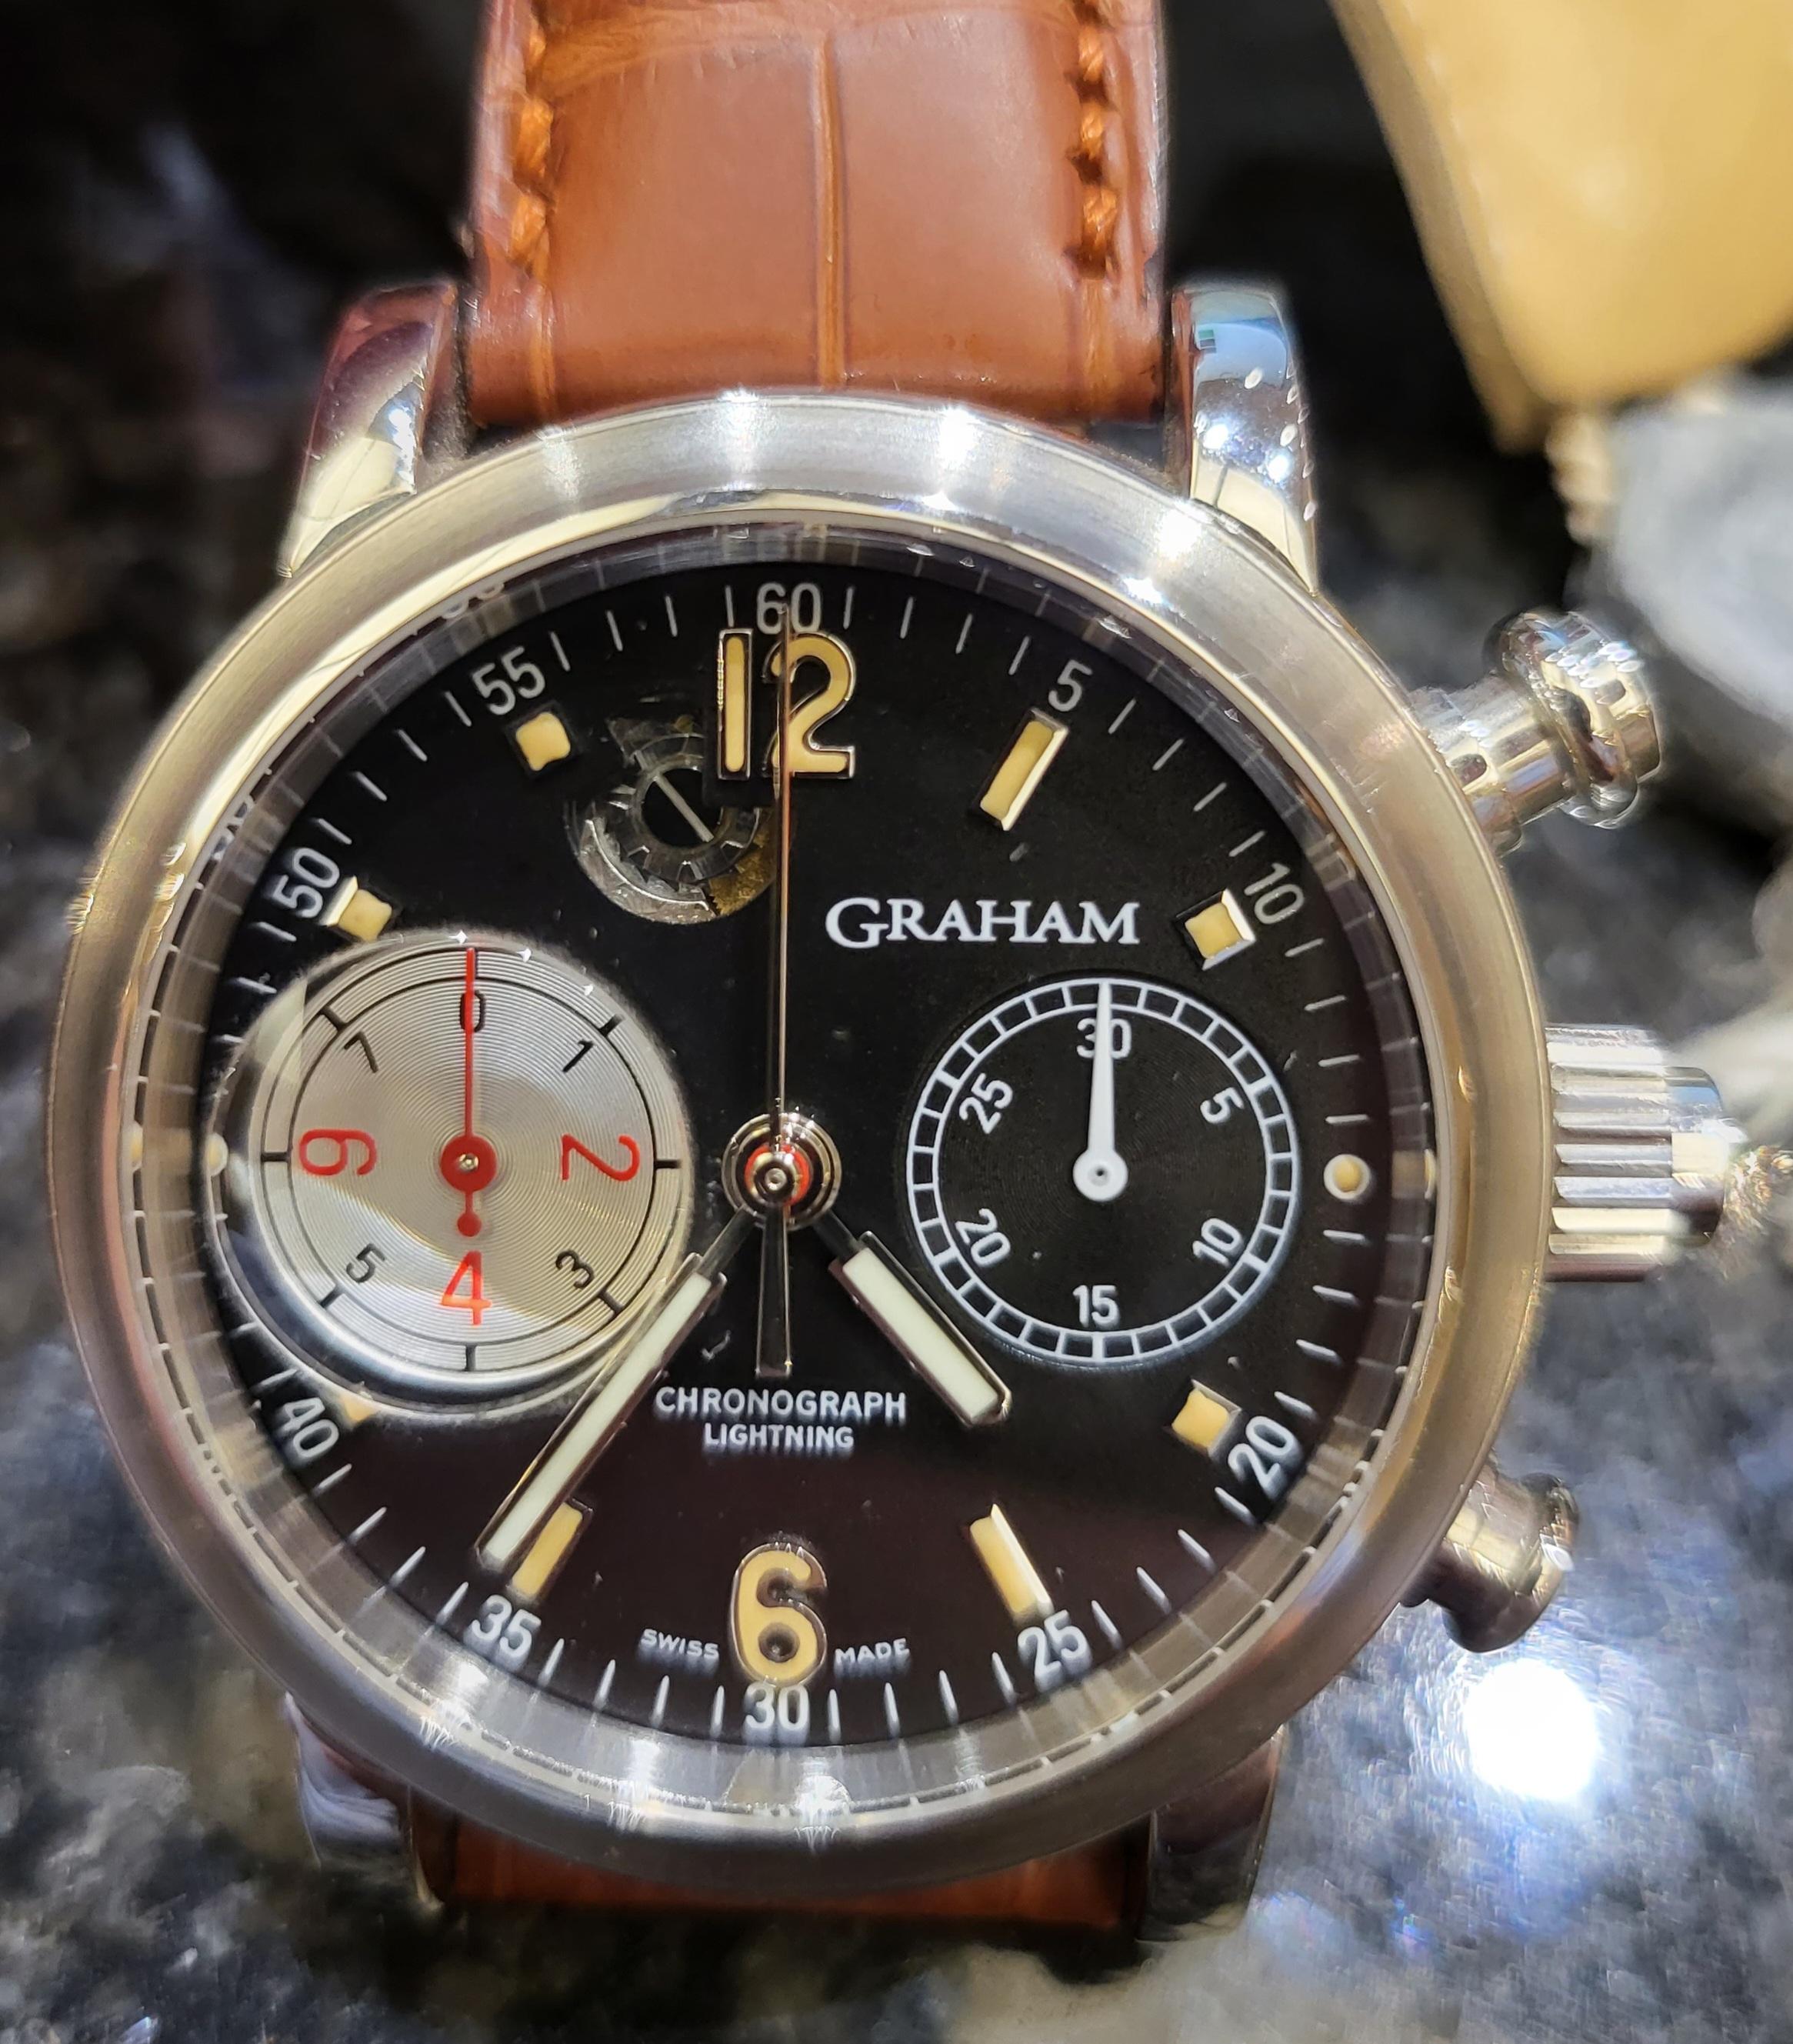 Graham Chronograph Foudroyante/Rattrapante Lightning New in Box With all Warranty Papers

Movement: Self-winding G-1695 chronograph movement, power reserve of 42 hours, watch has passed the G.O.S.C. official chronometer test. 40 rubies 28800 uph two